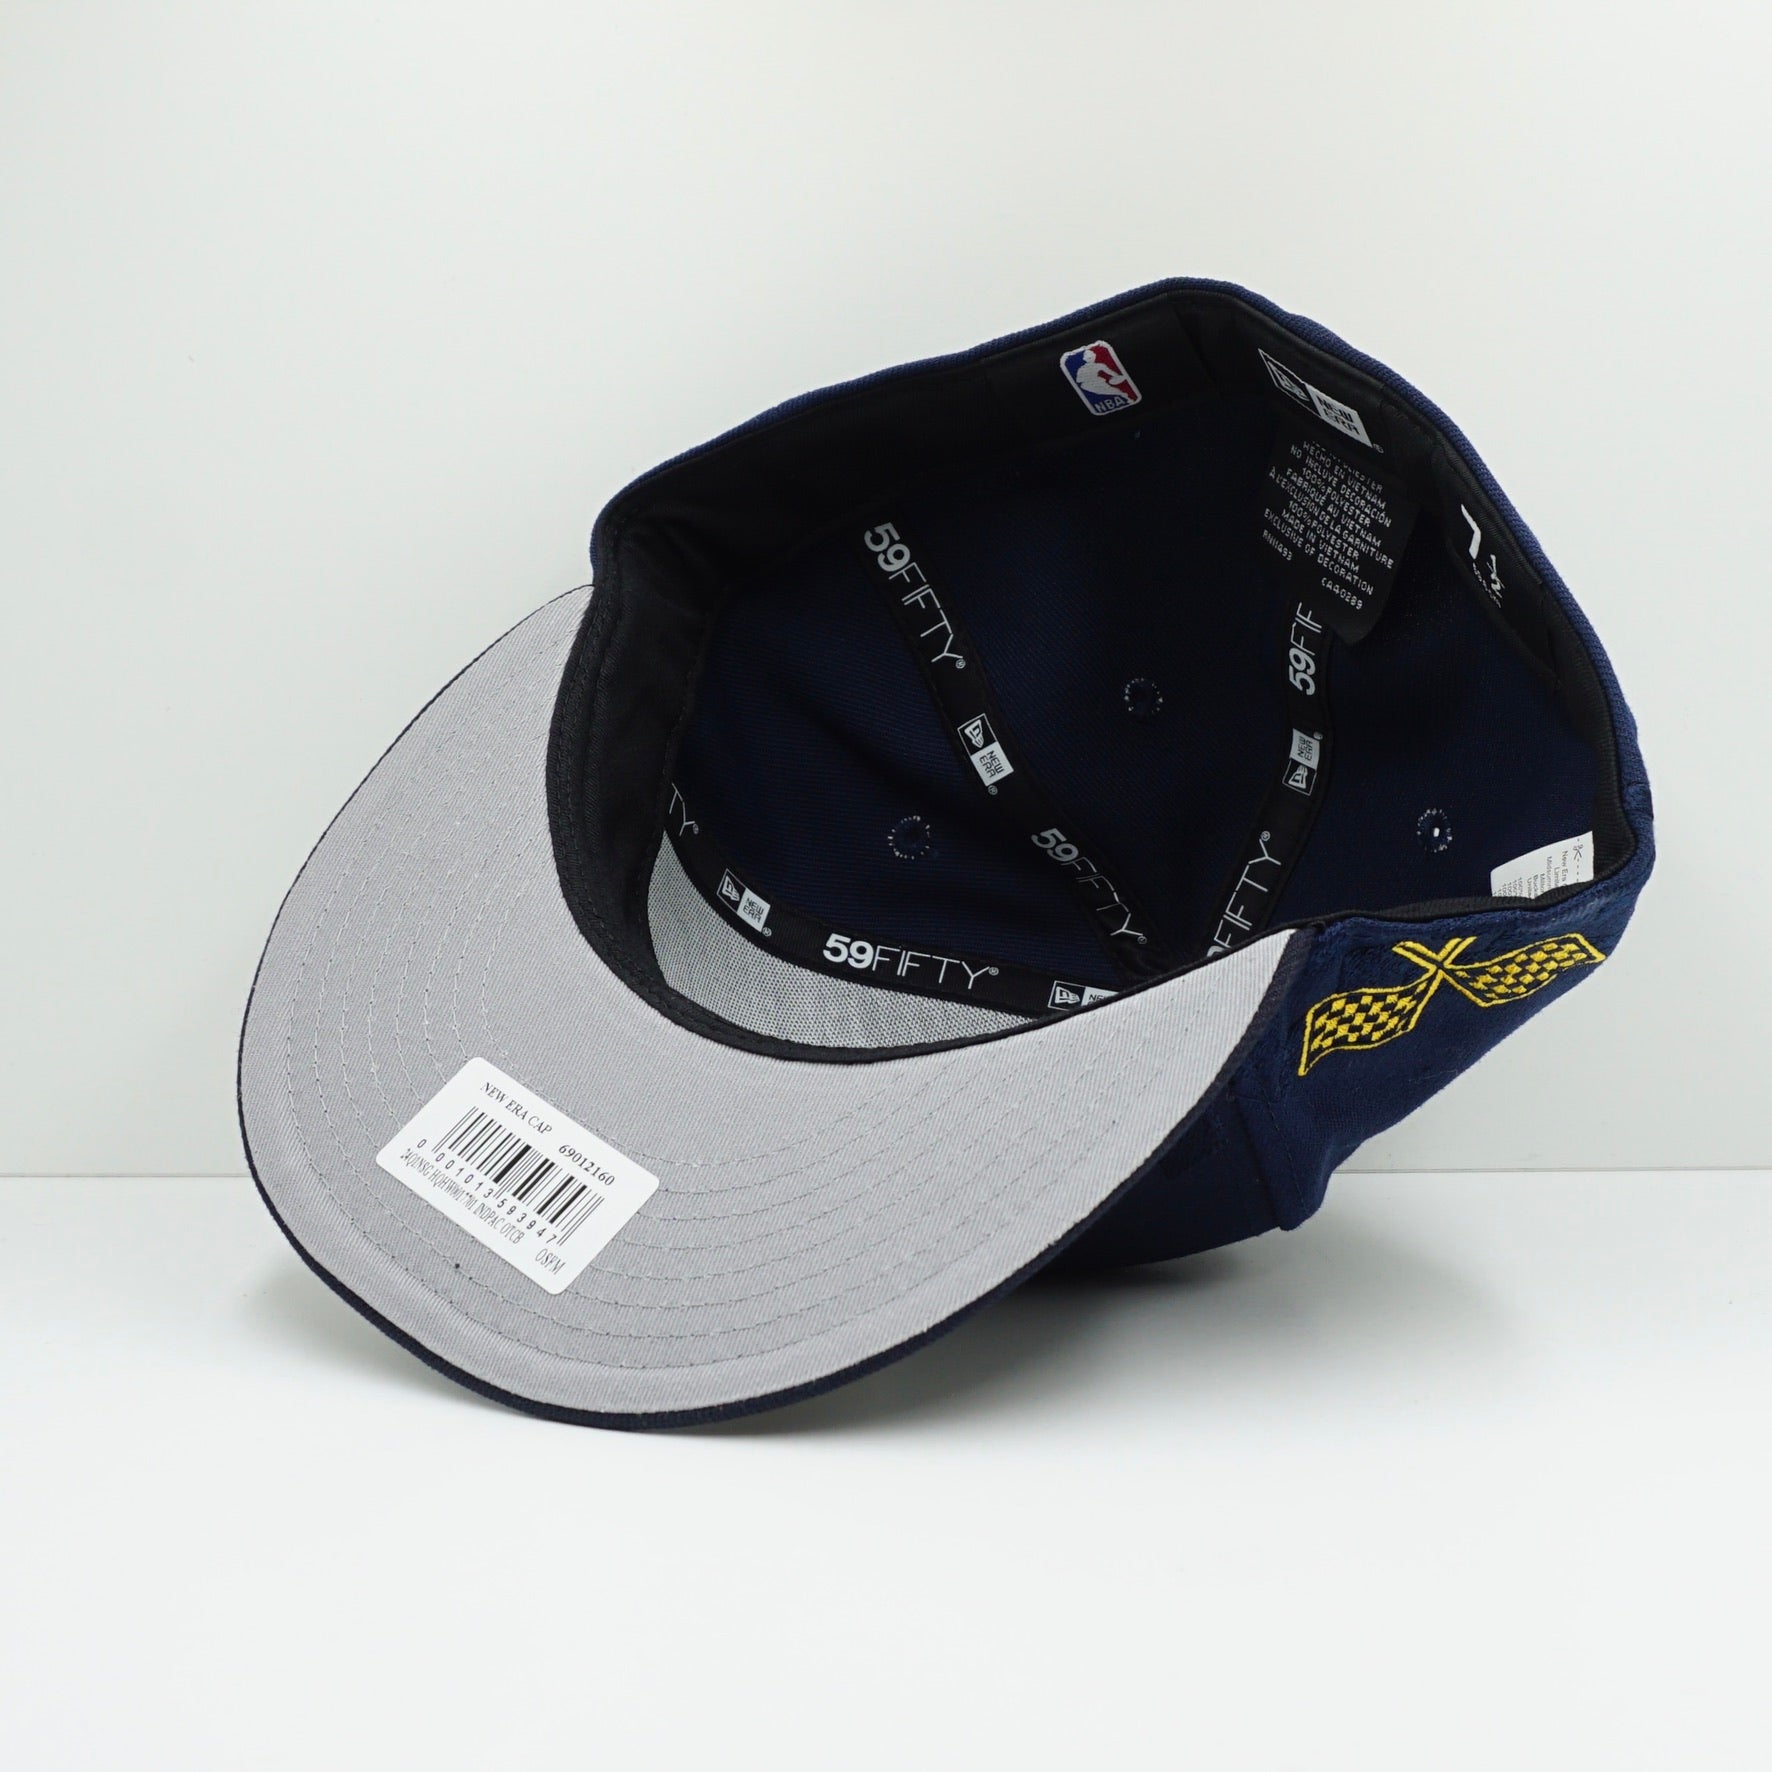 New Era Indiana Pacers Navy Fitted Cap